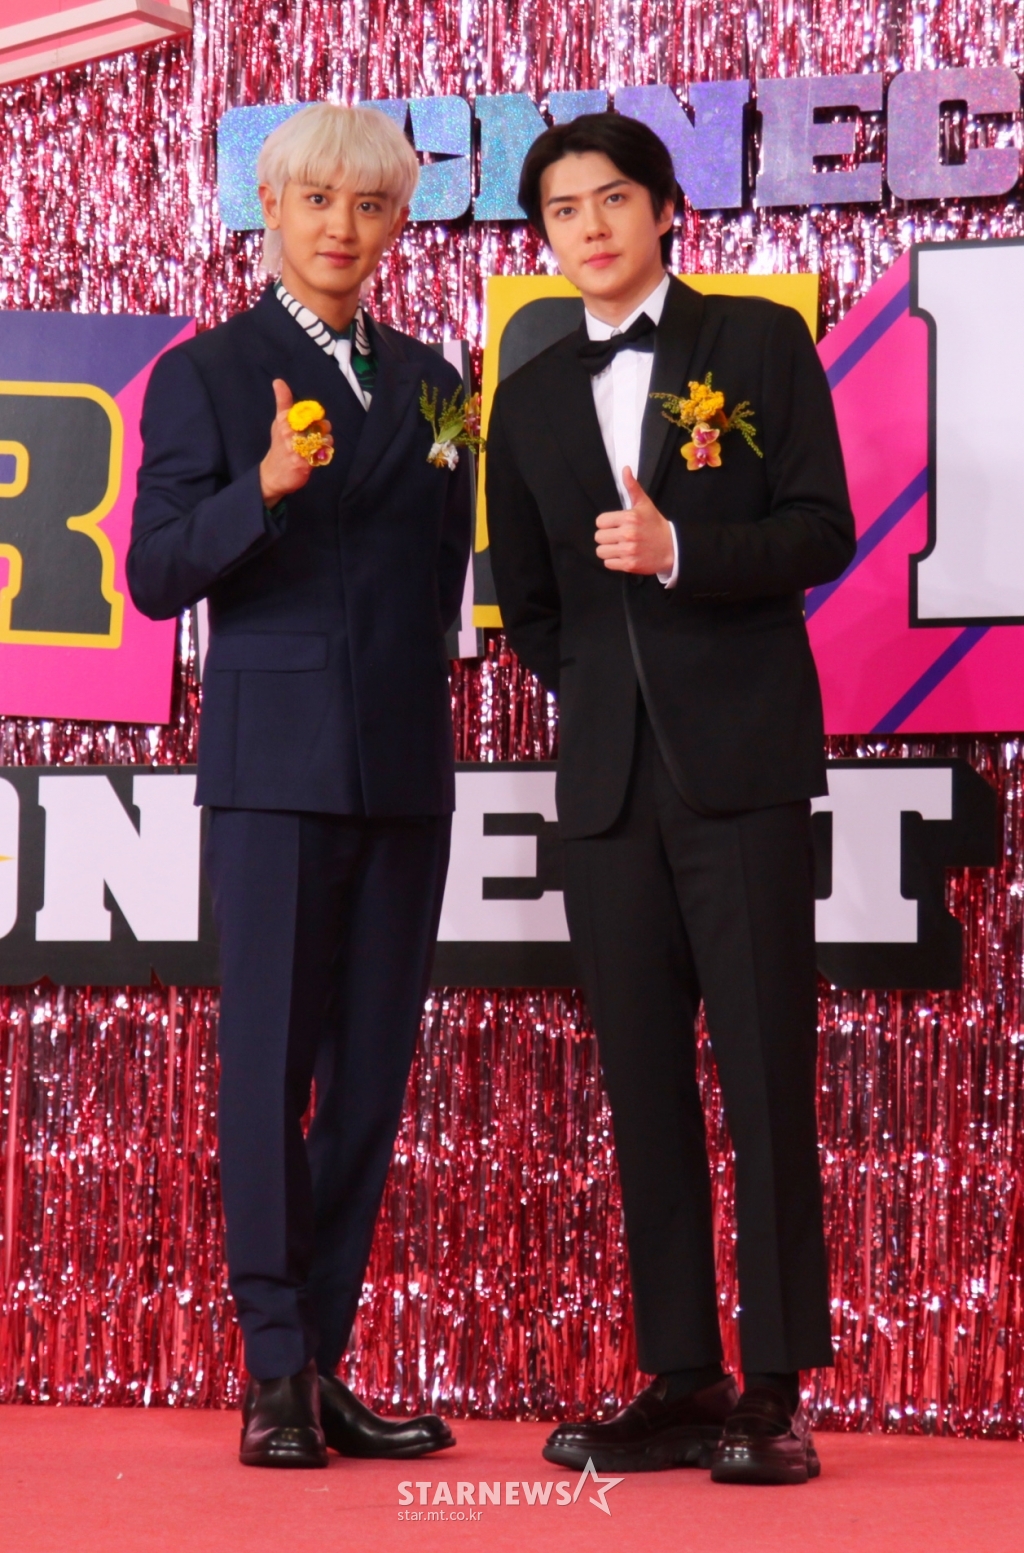 The group EXO-SC is posing at the 26th Dream concert CONNECT:D red carpet event, which was broadcast live on Non-Contact online on the 25th. This concert is held by EXO-SC, Red Velvet, Irene & Ski, Oh My Girl, Astro, South Club, Golden Child, Kim Jae Hwan, The group included S, CIX and Cravity./ Photos